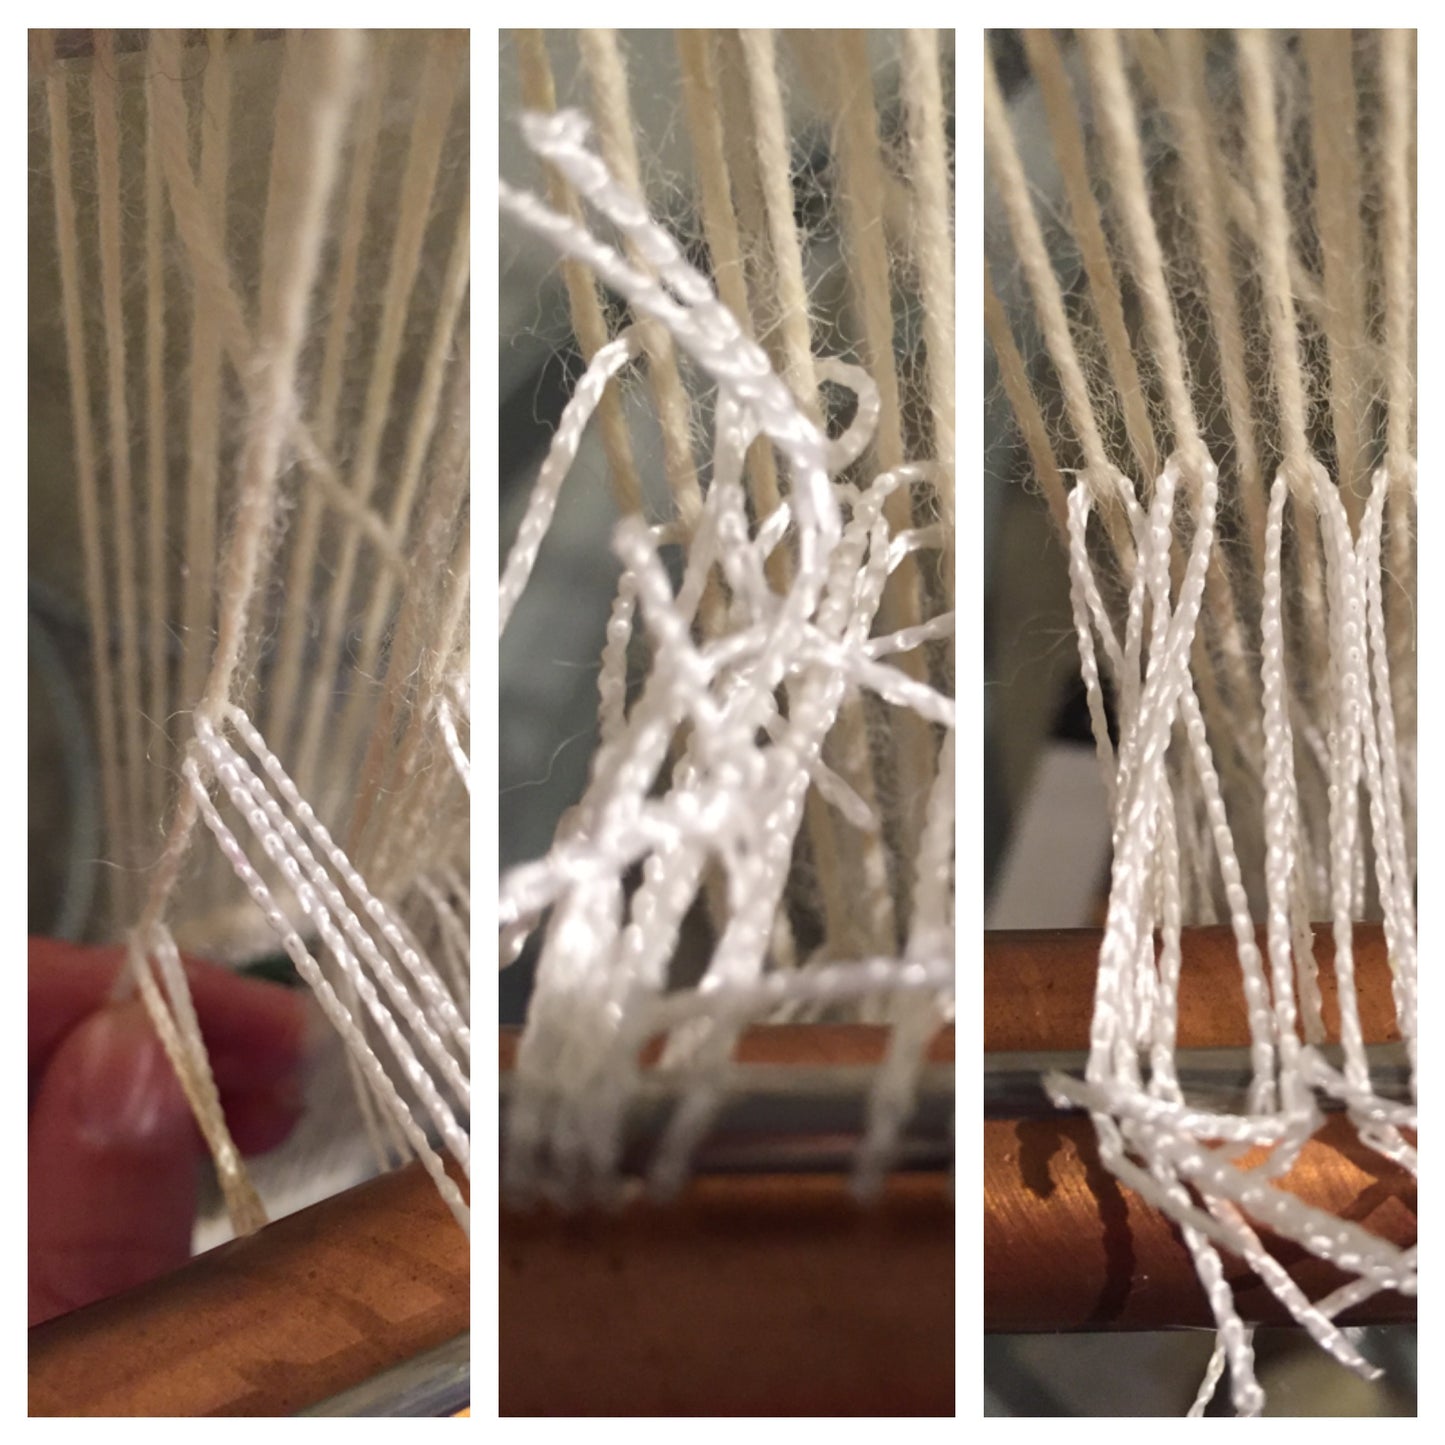 Heddle Troubleshooting for Tapestry (Updated)